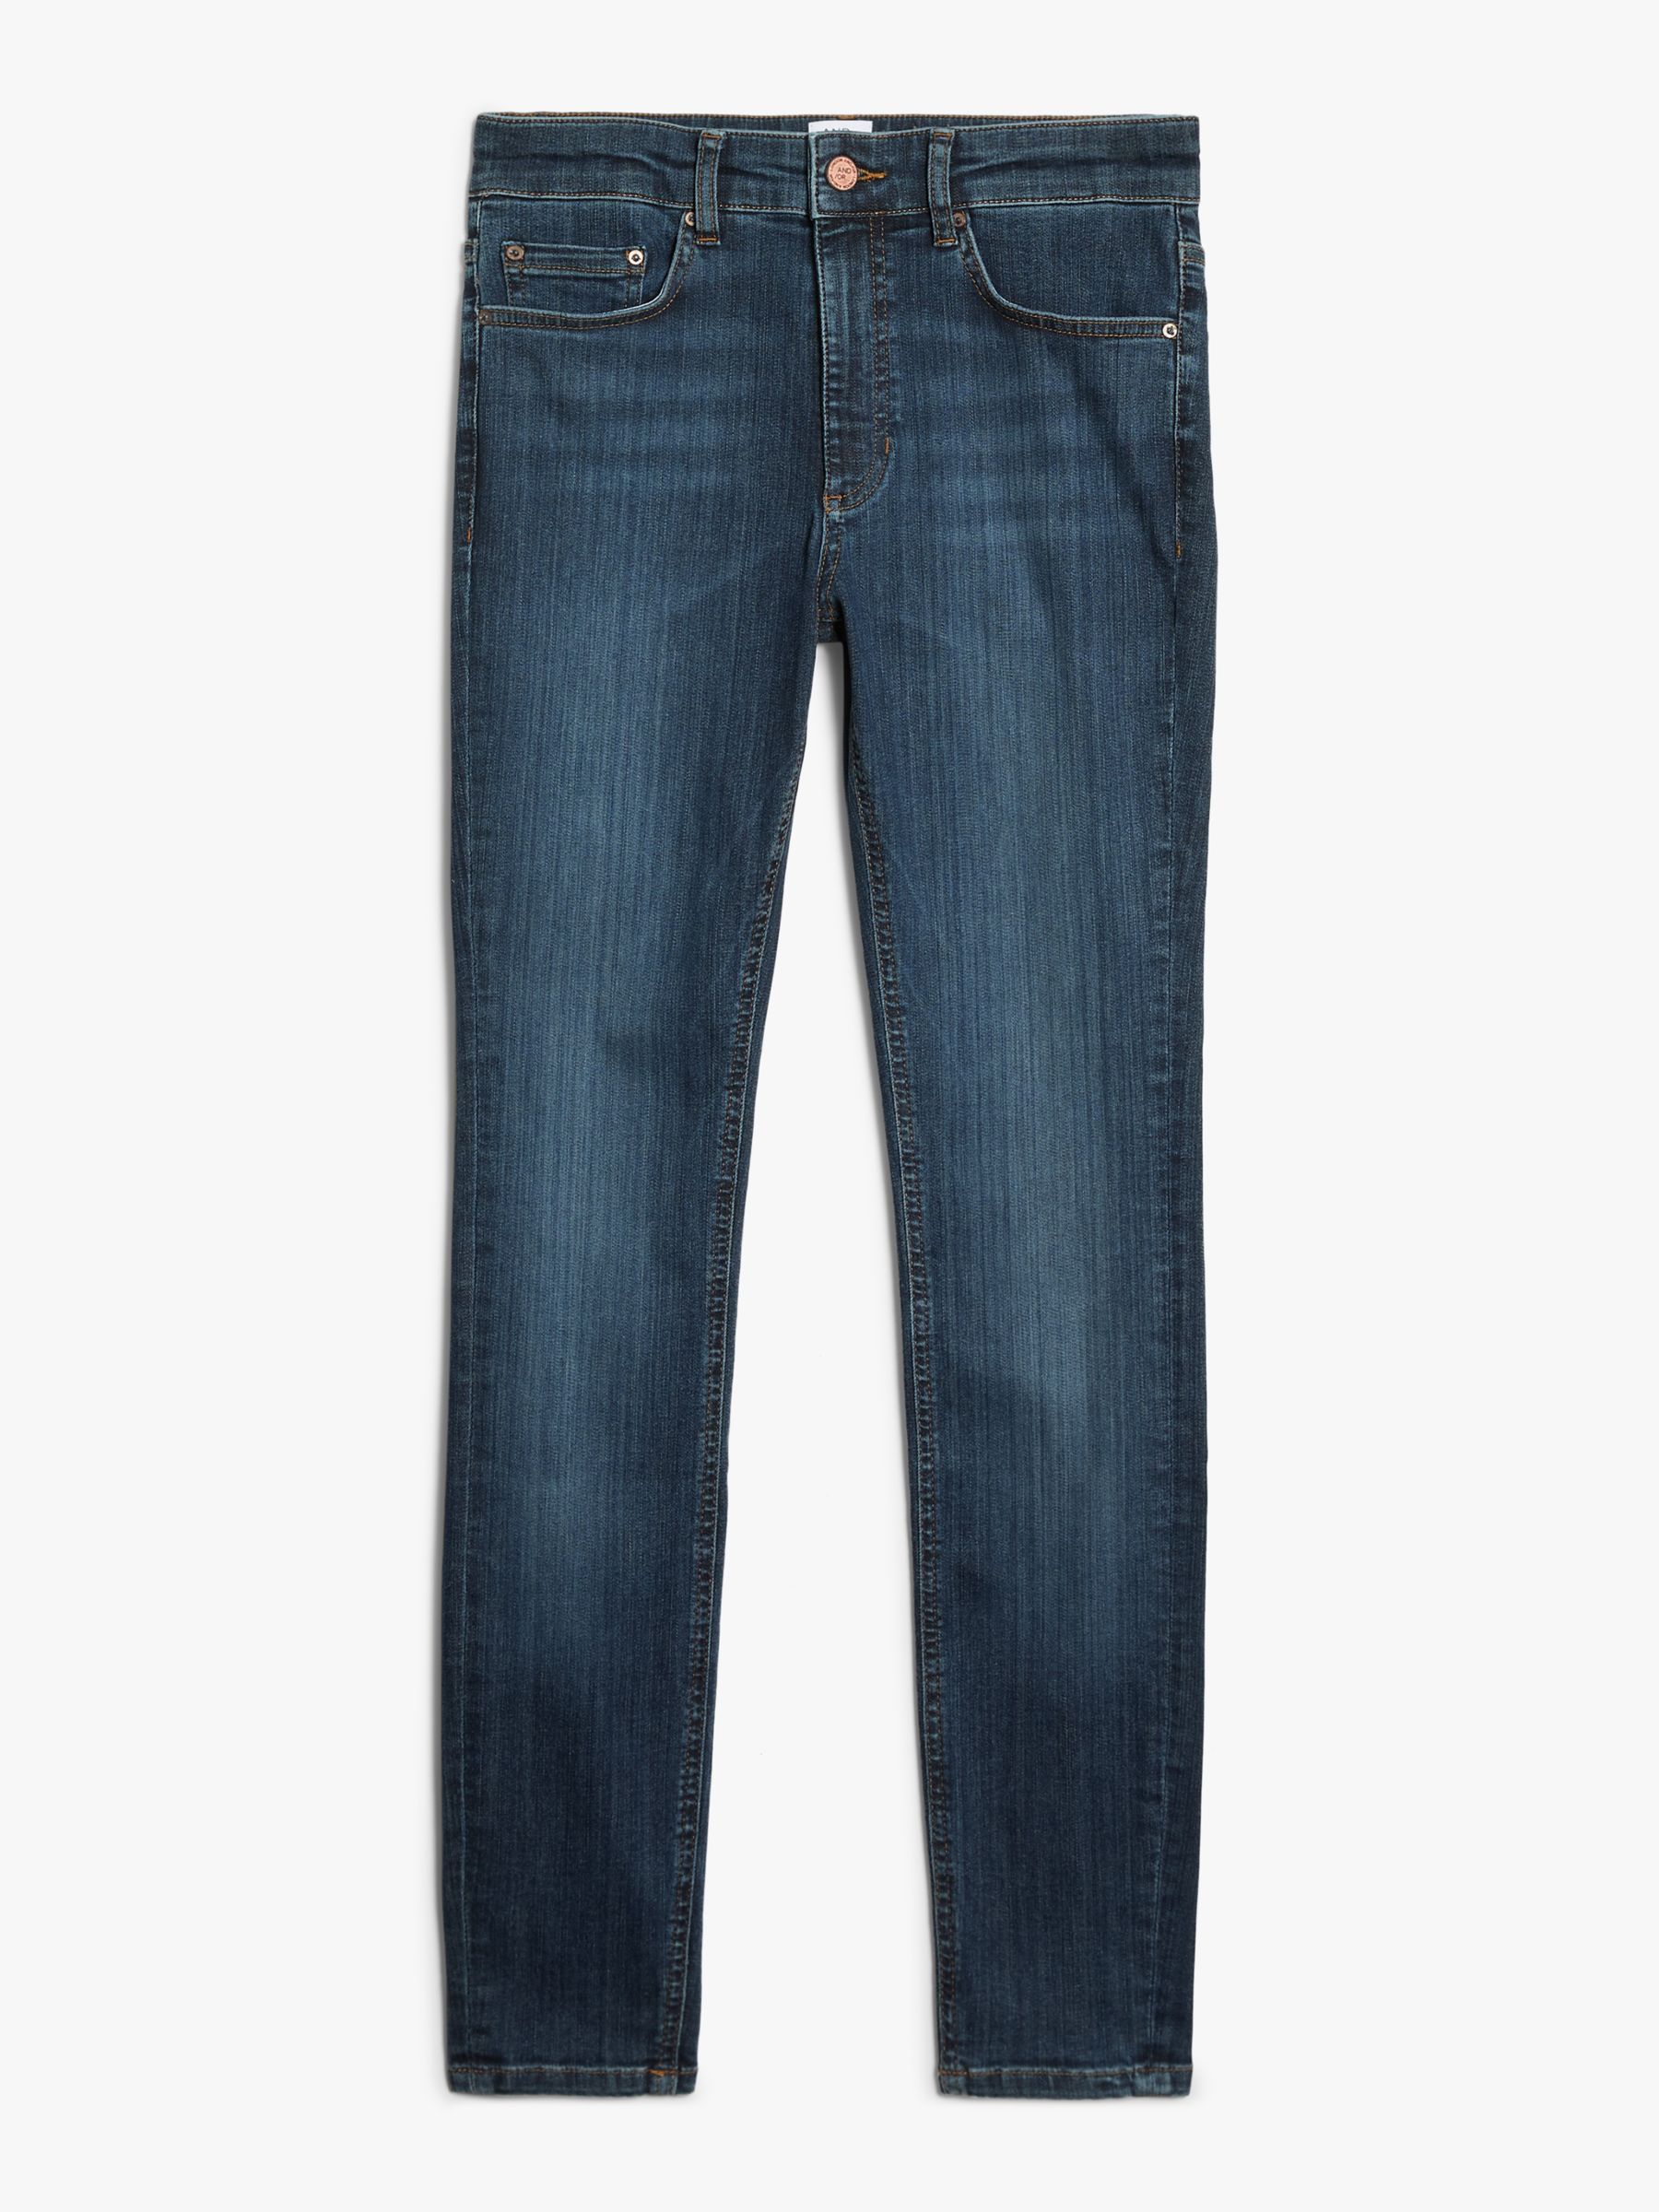 AND/OR Abbot Kinney Skinny Jeans, Vintage Perfected, 26